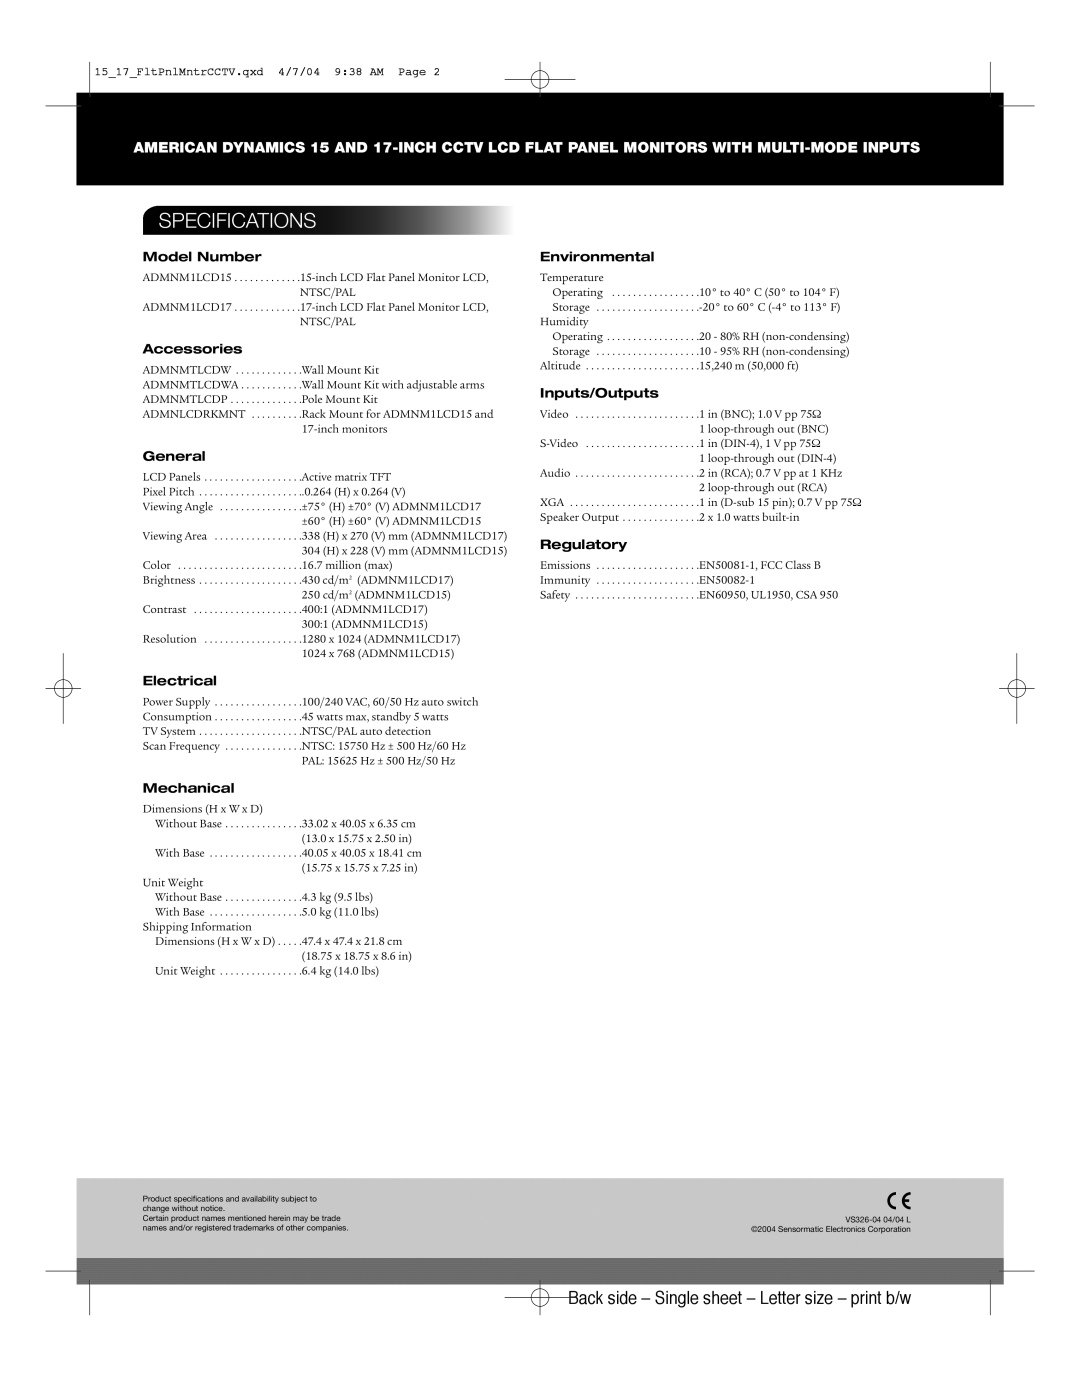 American Dynamics 15 and 17-inch CCTV Specifications, Back side - Single sheet - Letter size - print b/w, Model Number 